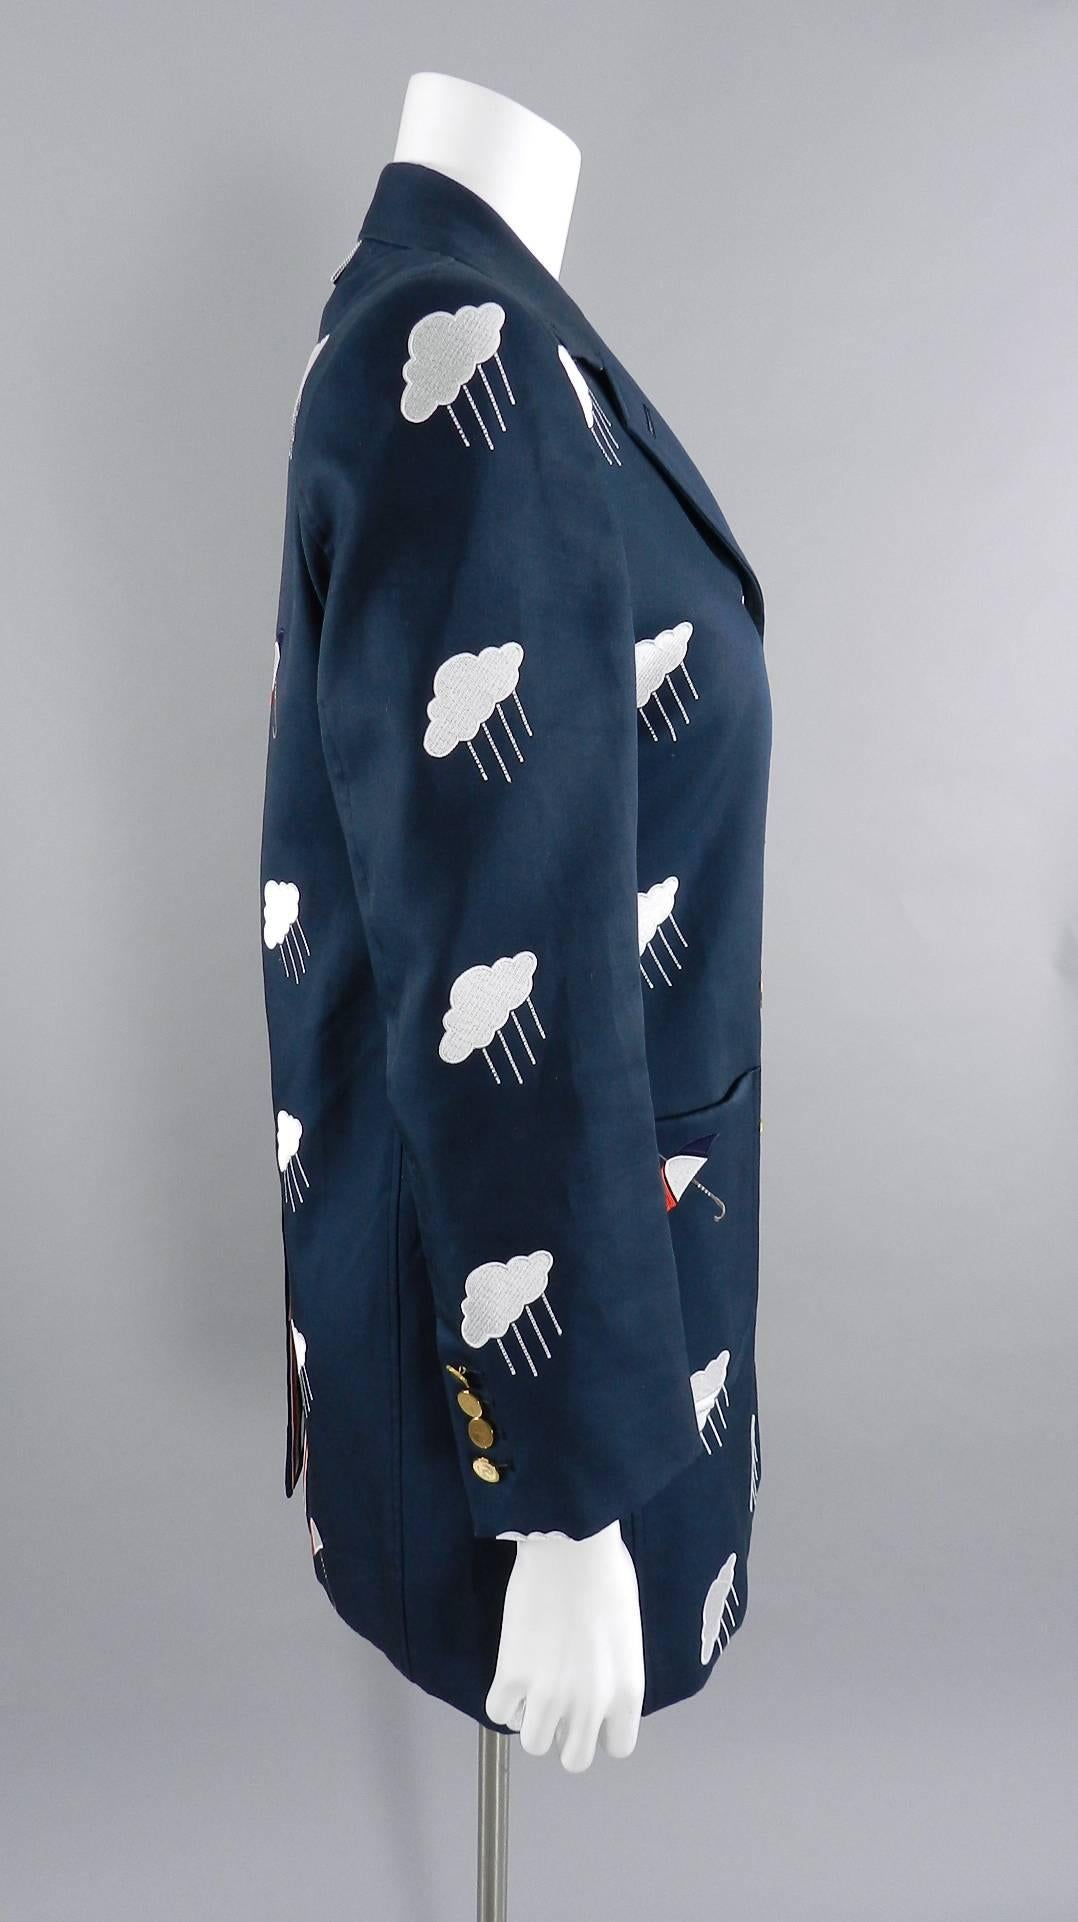 Thom Browne Navy Embroidered Coat with Umbrellas and Clouds.  Gold buttons at front and cuffs, striped interior lining, signature red, white, blue striped ribbon trim. $3780+ original retail price tag in pocket. Tagged size IT 42 (USA 6). Garment